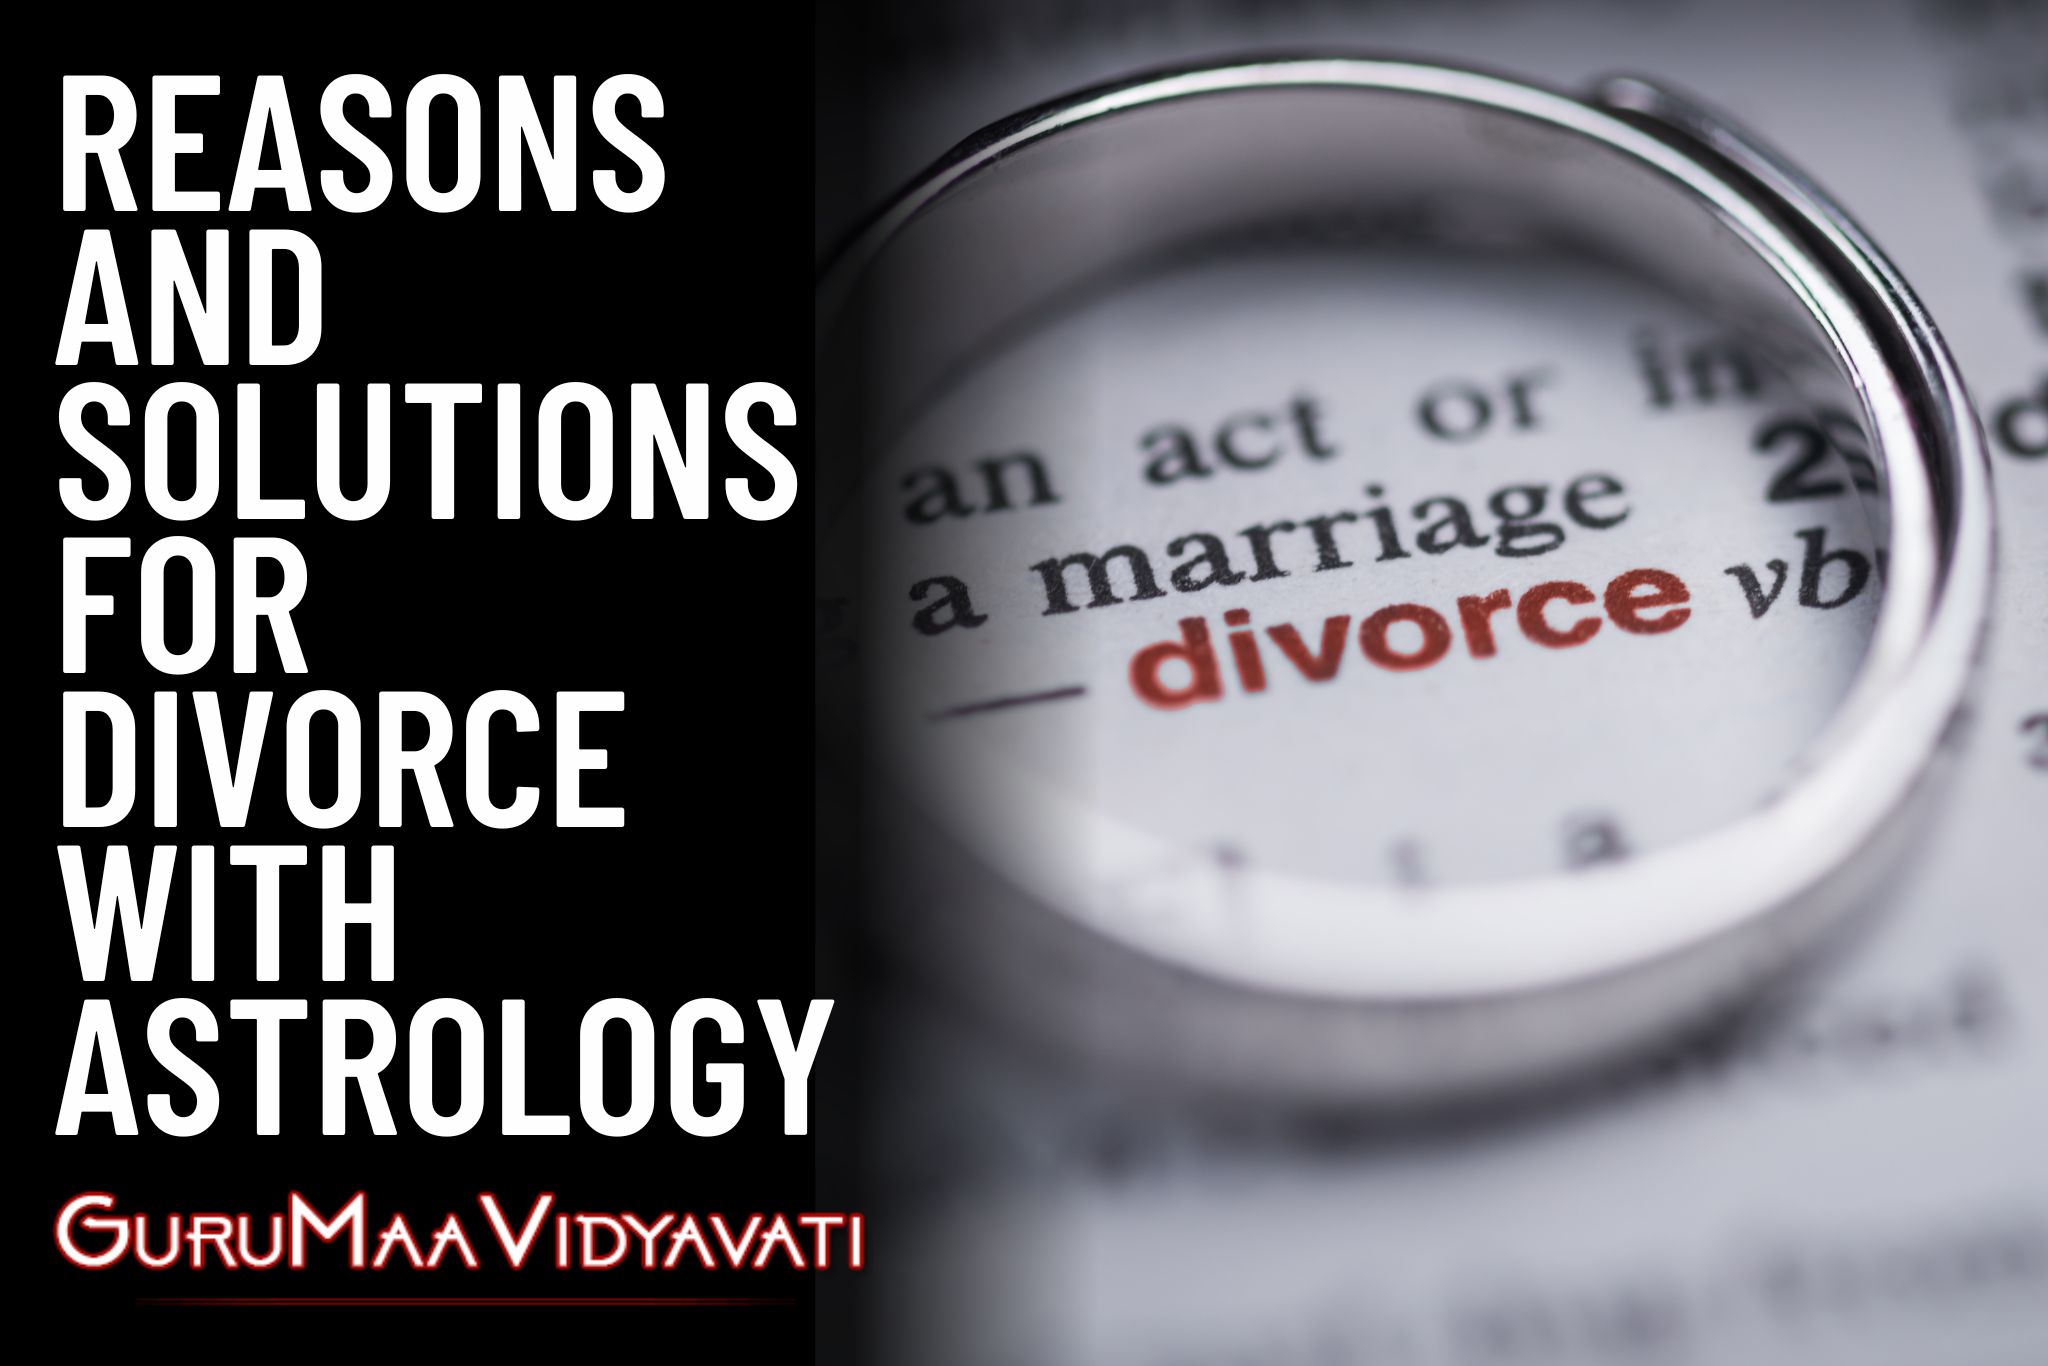 Astrological Reasons and Solutions for Divorce with Astrology